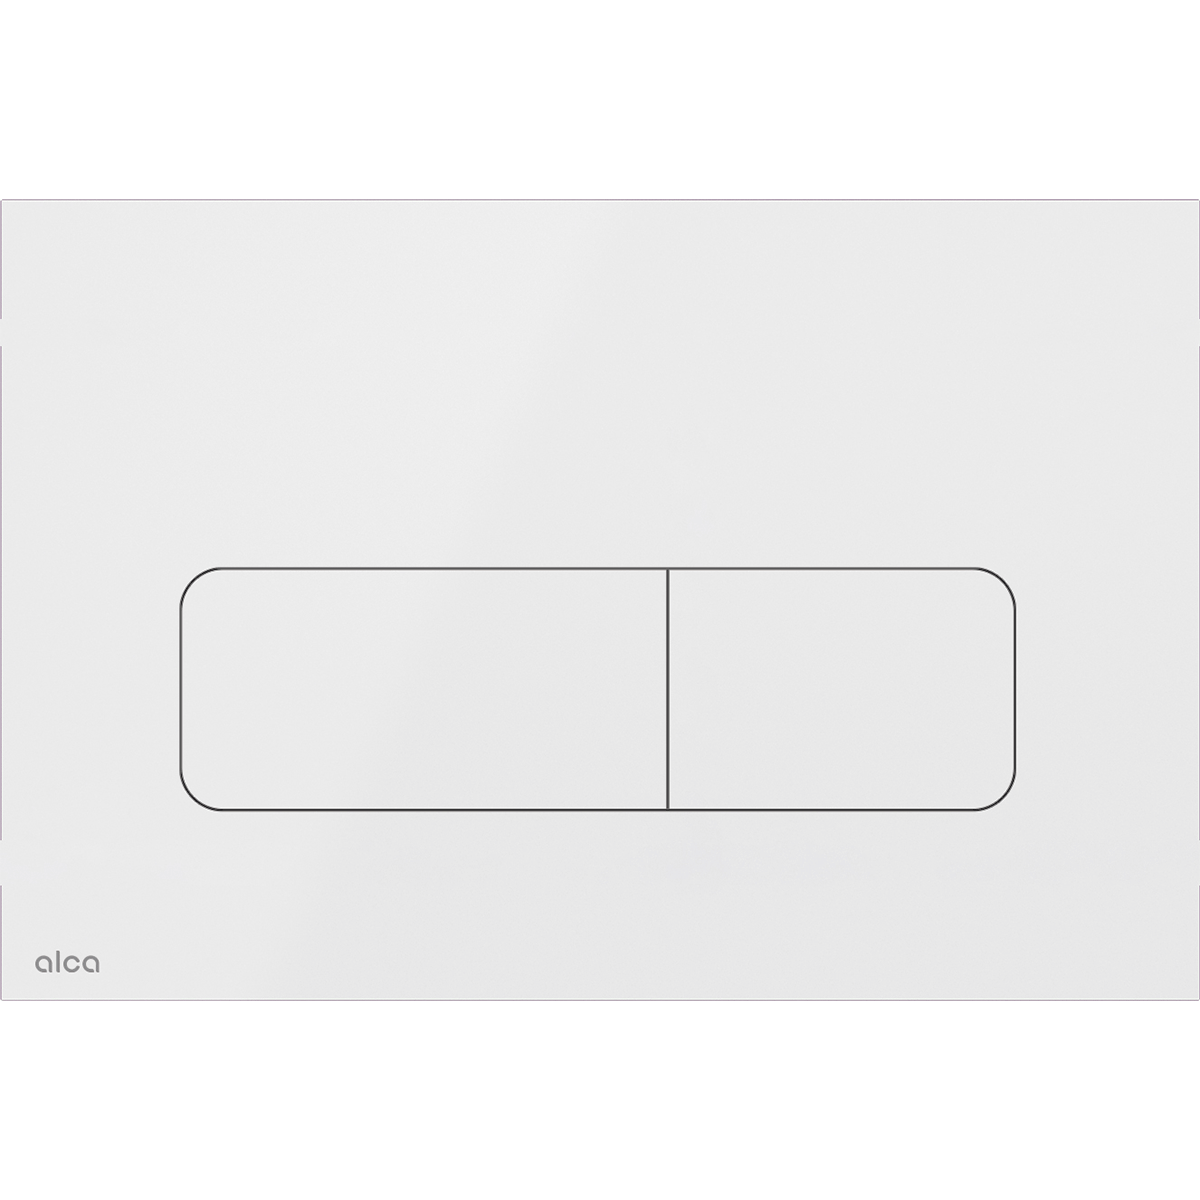 MOON-WHITE - Flush plate for pre-wall installation systems, inox-white polished